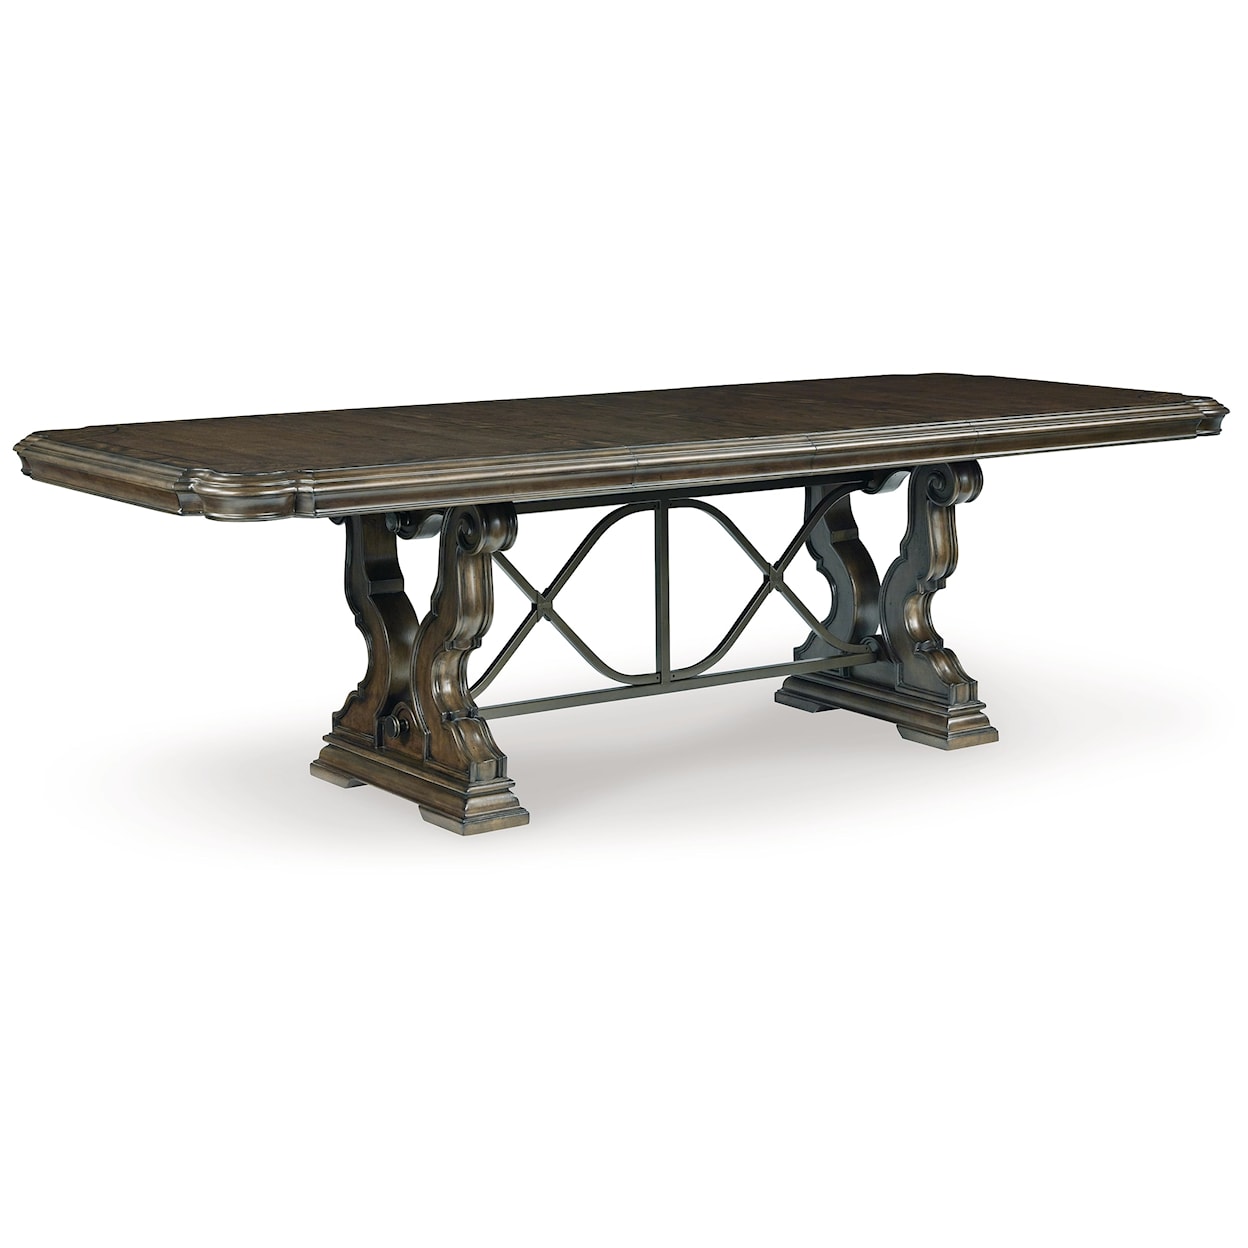 Michael Alan Select Maylee Dining Extension Table